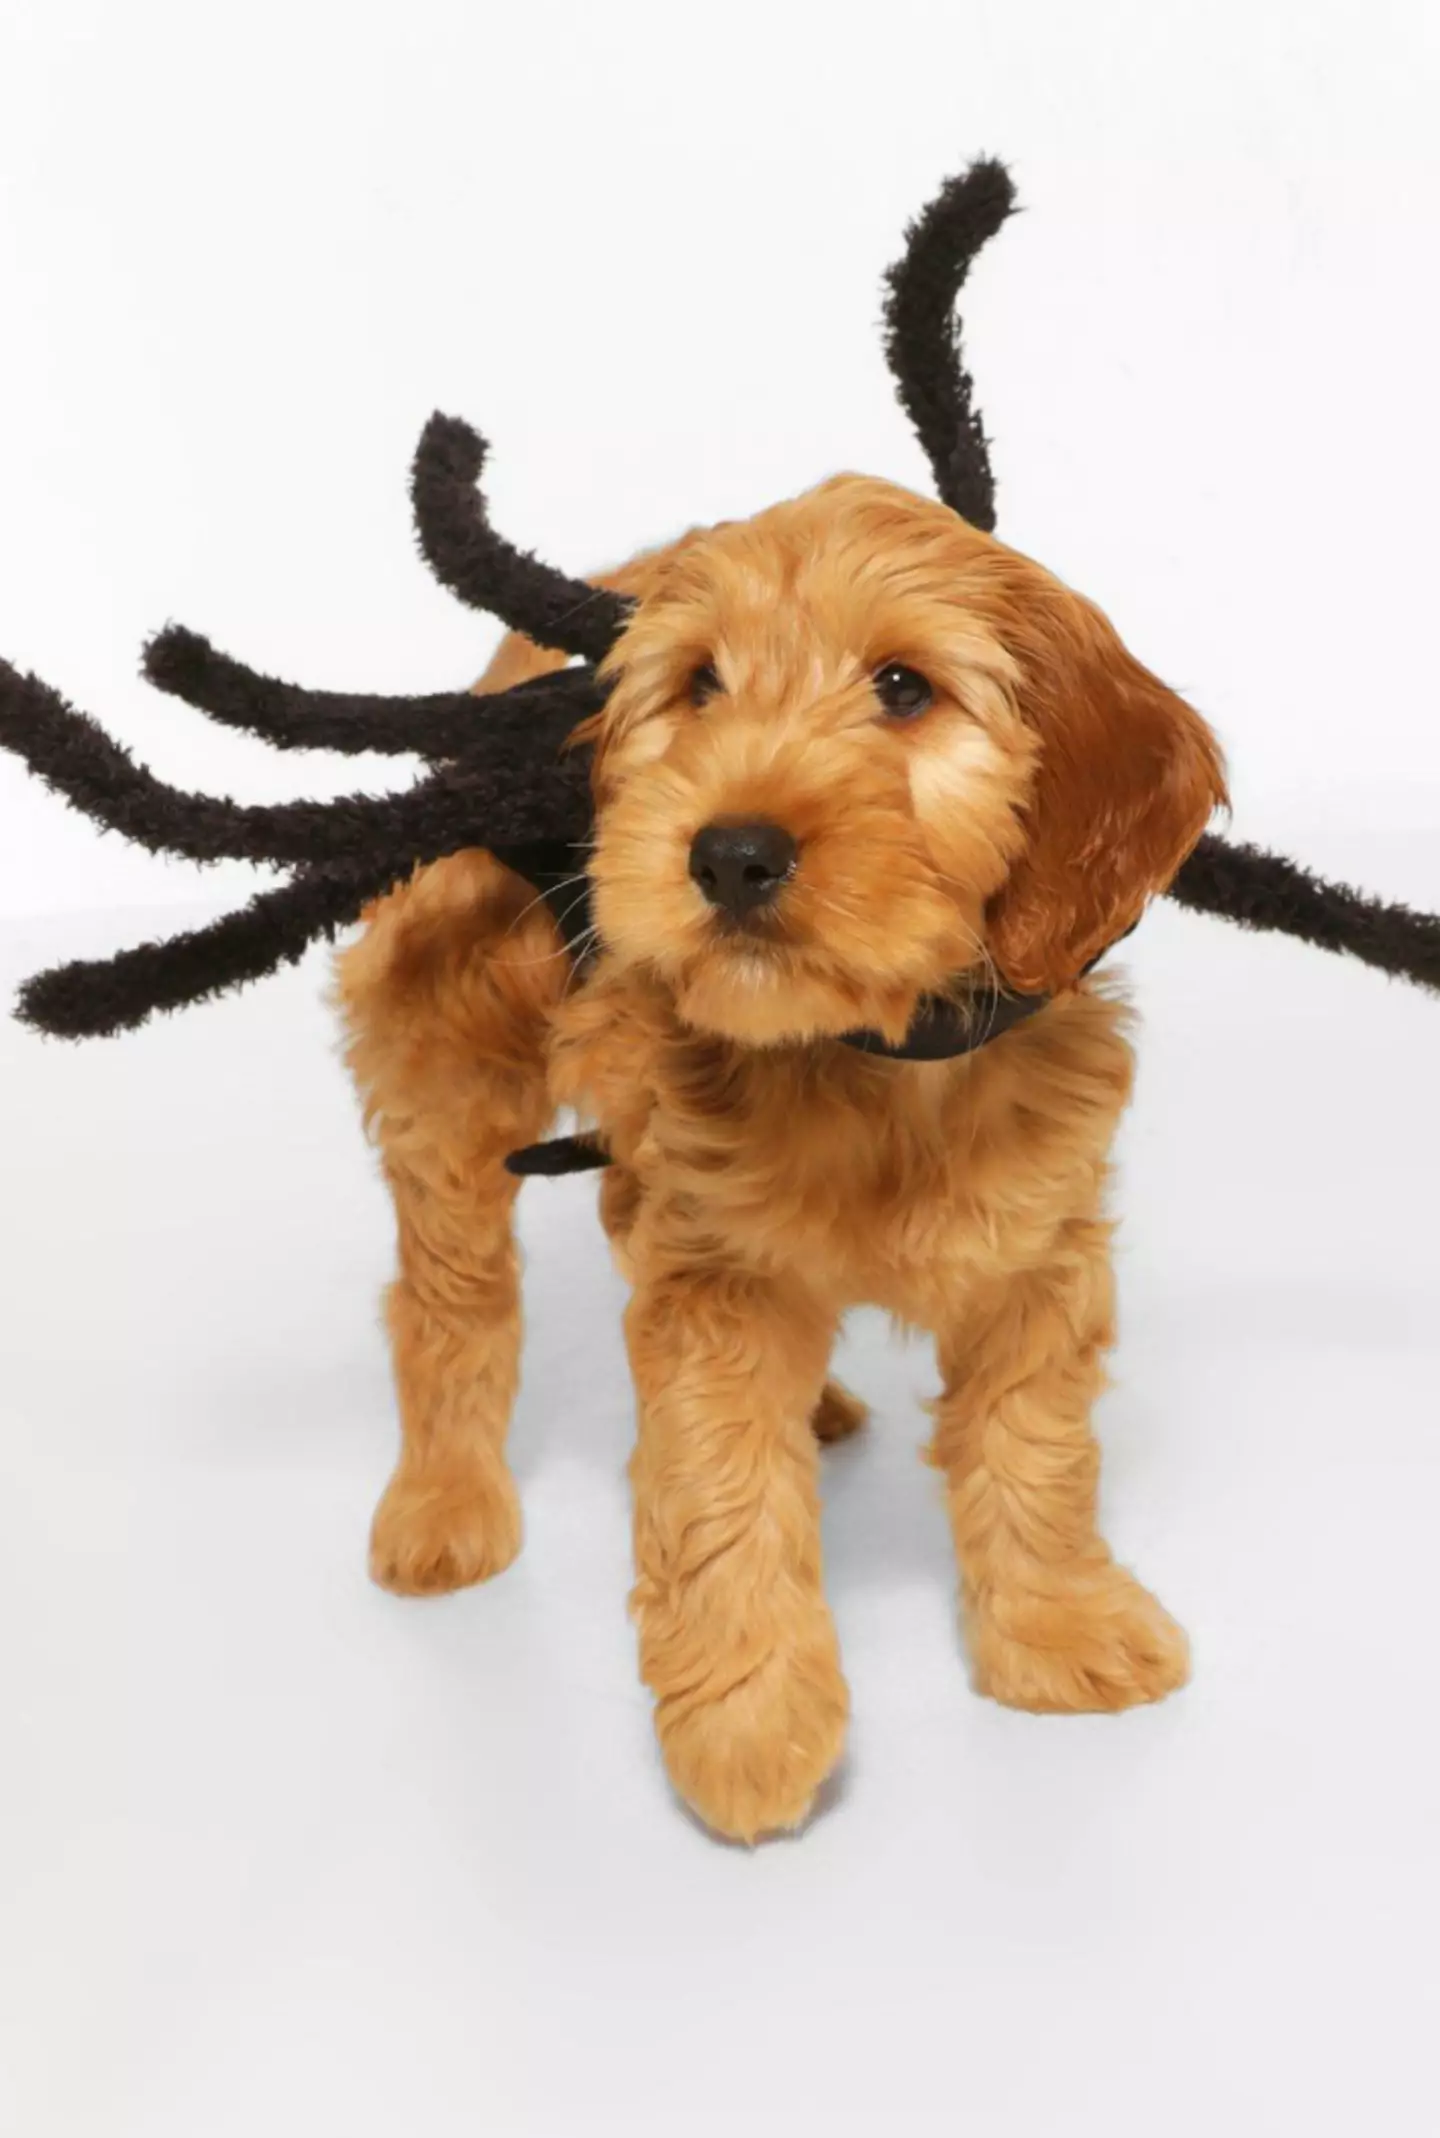 It's a spider-dog (